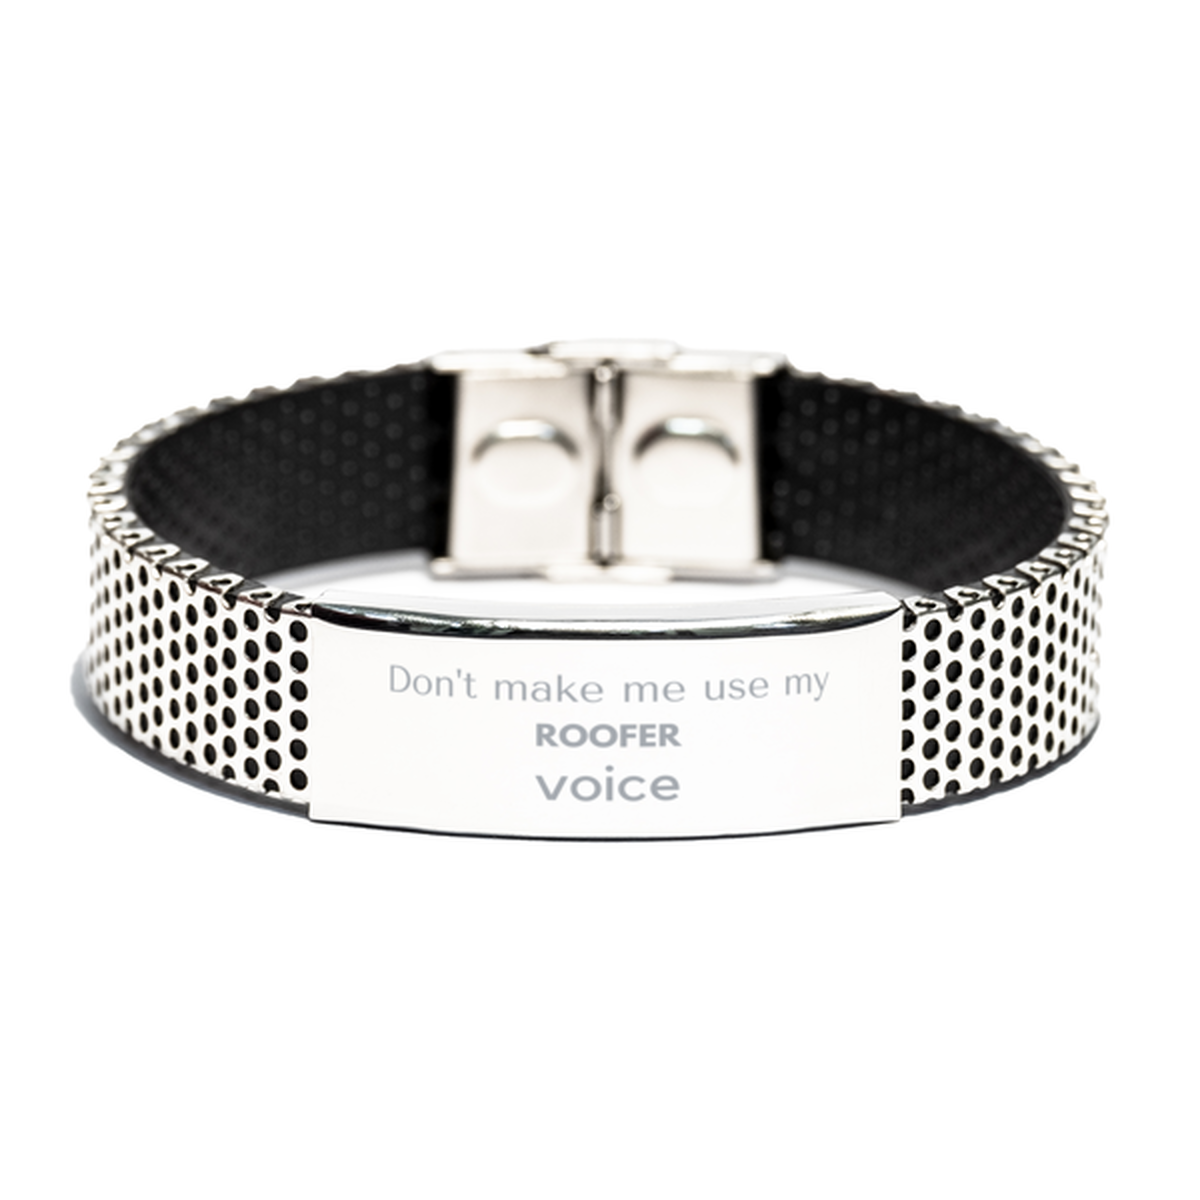 Don't make me use my Roofer voice, Sarcasm Roofer Gifts, Christmas Roofer Stainless Steel Bracelet Birthday Unique Gifts For Roofer Coworkers, Men, Women, Colleague, Friends